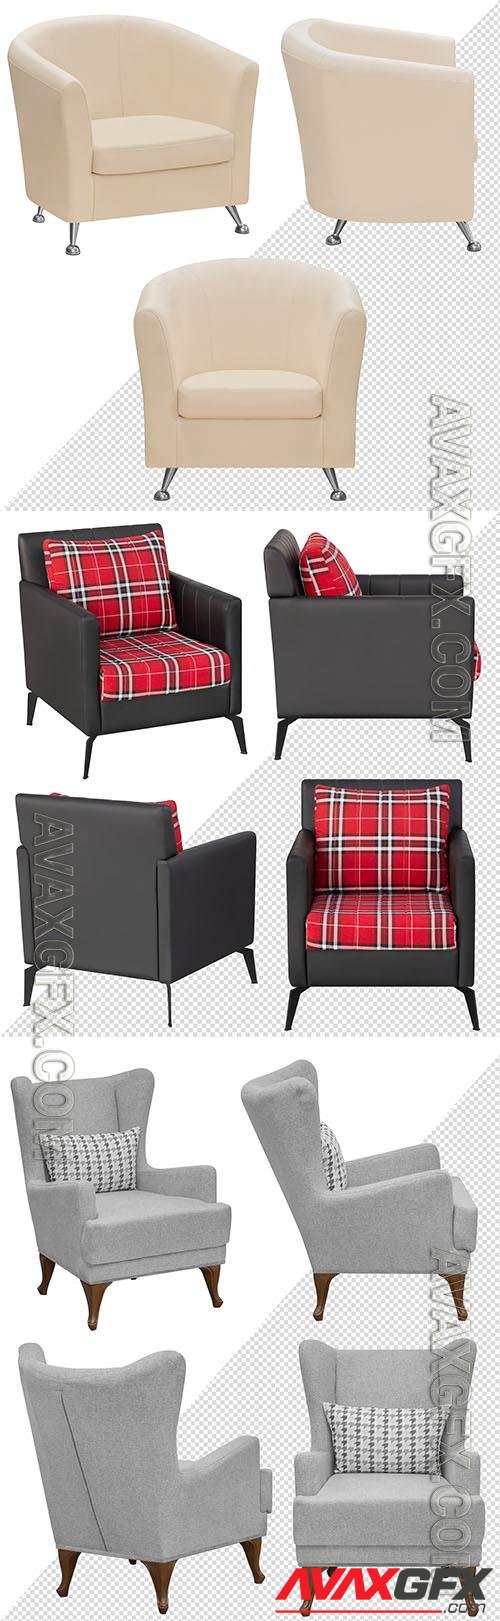 Upholstered armchair for the office or at home psd design template